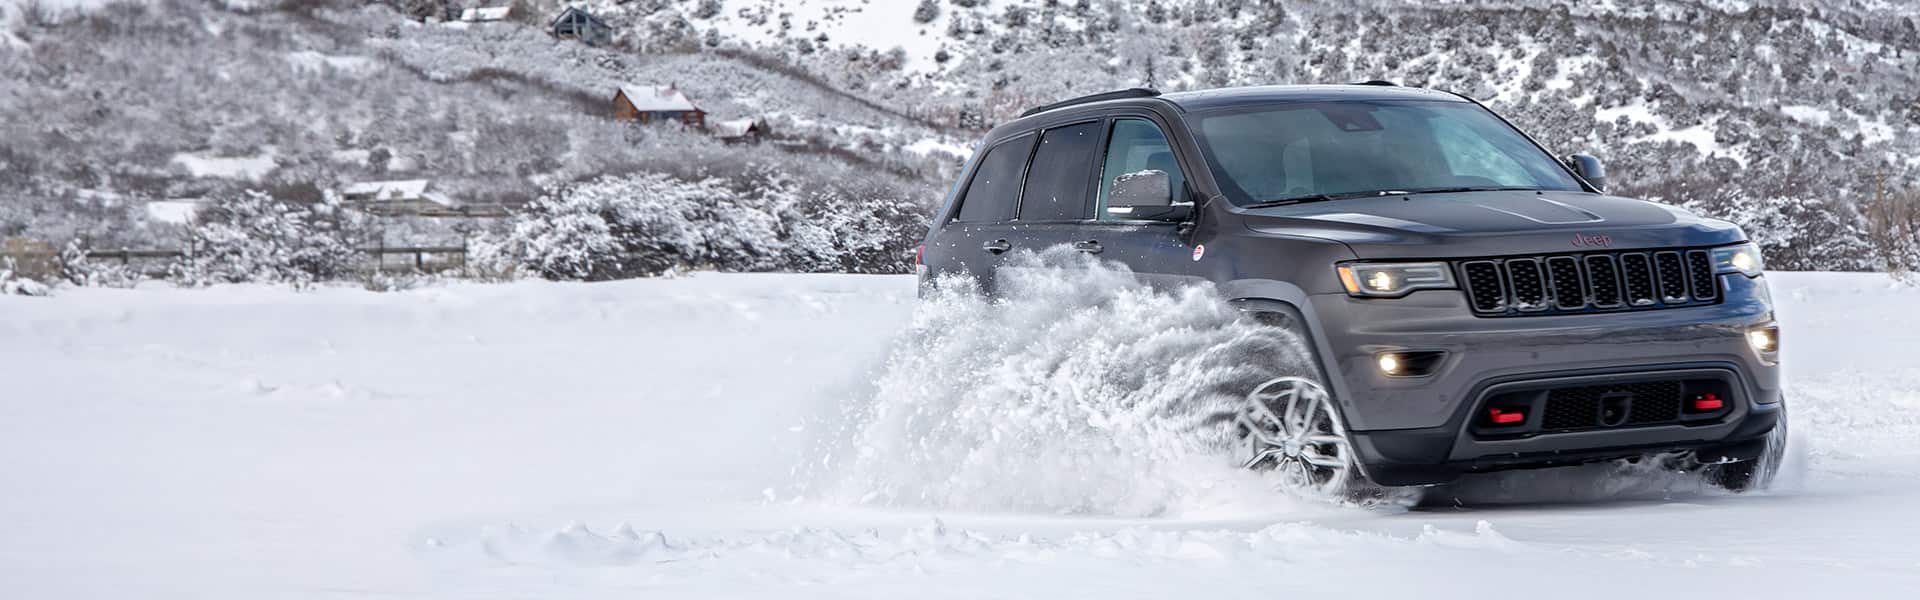 2021 Jeep Grand Cherokee Trailhawk being driven off-road in winter, with sprays of snow obscuring its wheels.